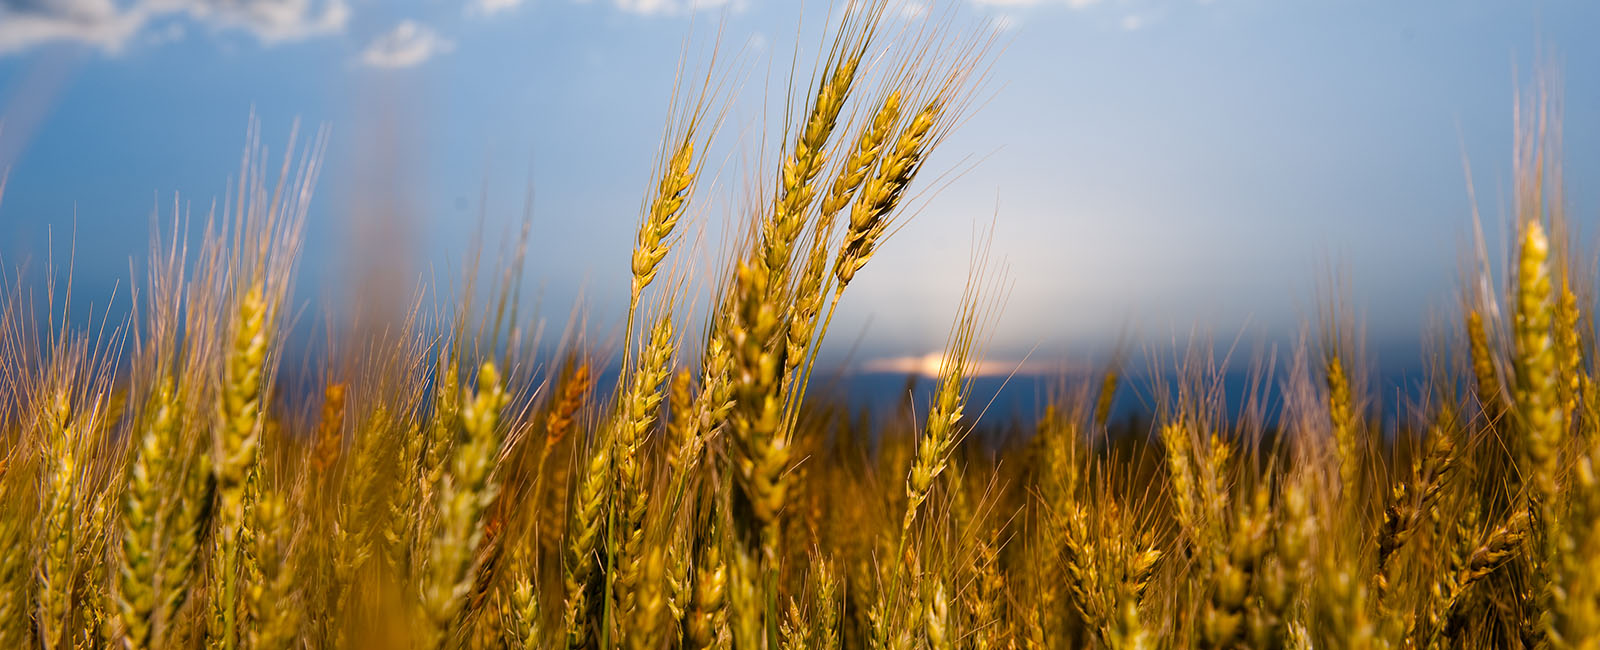 This image shows a field of wheat.